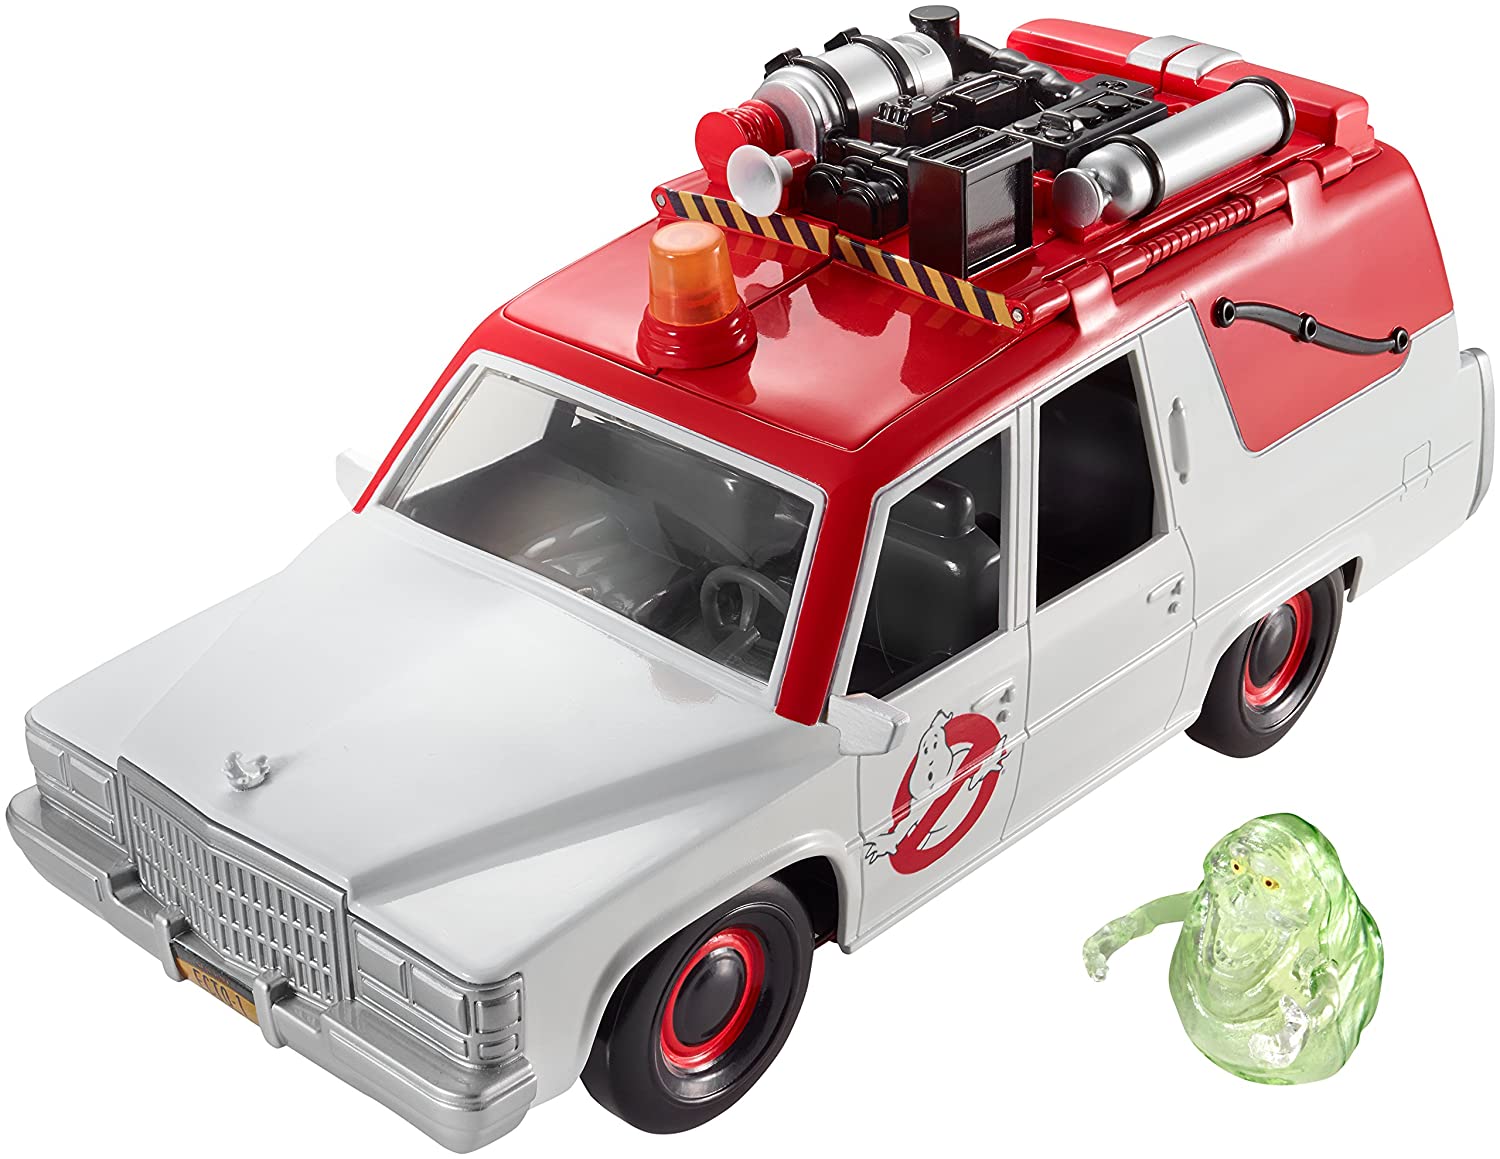 Ghostbusters ECTO-1 Vehicle and Slimer Figure